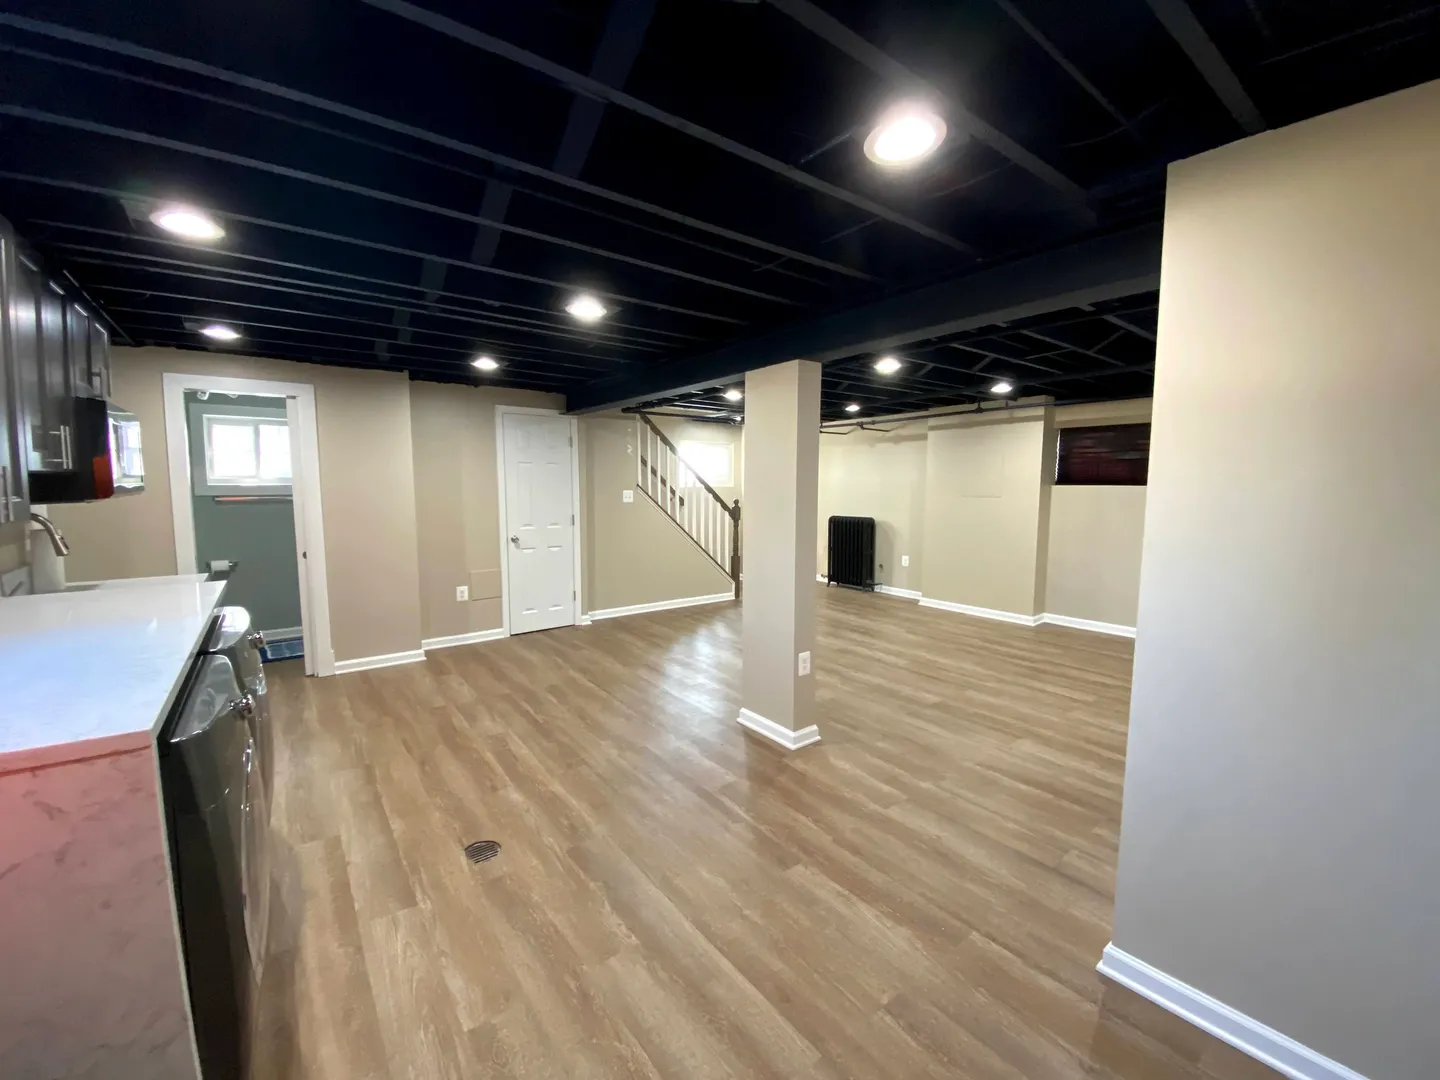 A room with black ceiling and wooden floors